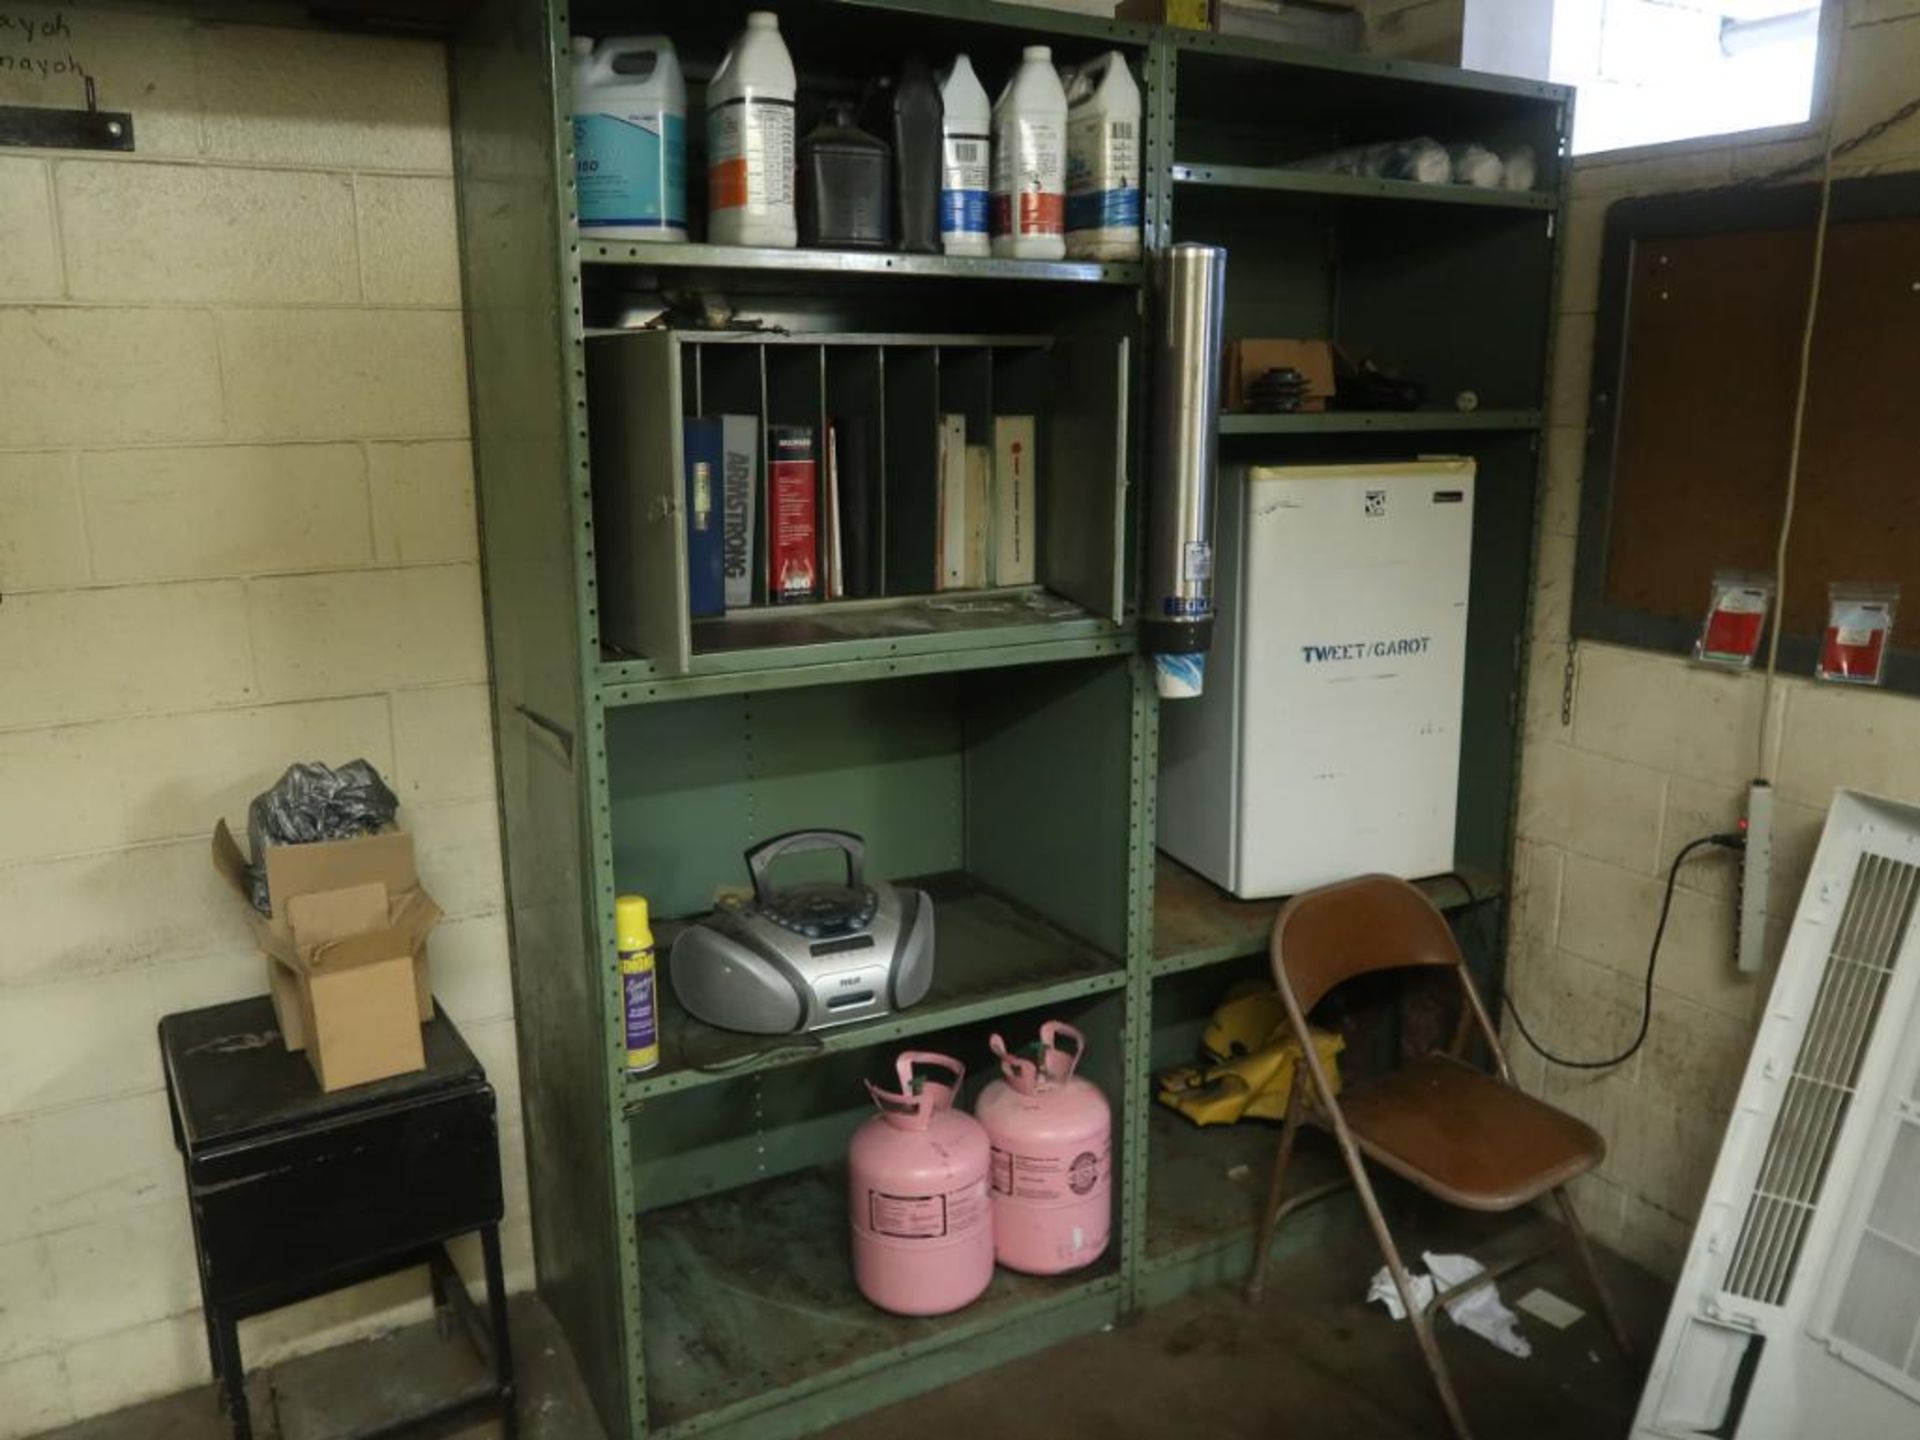 Refrigeration Repair Room Contents - Image 5 of 5